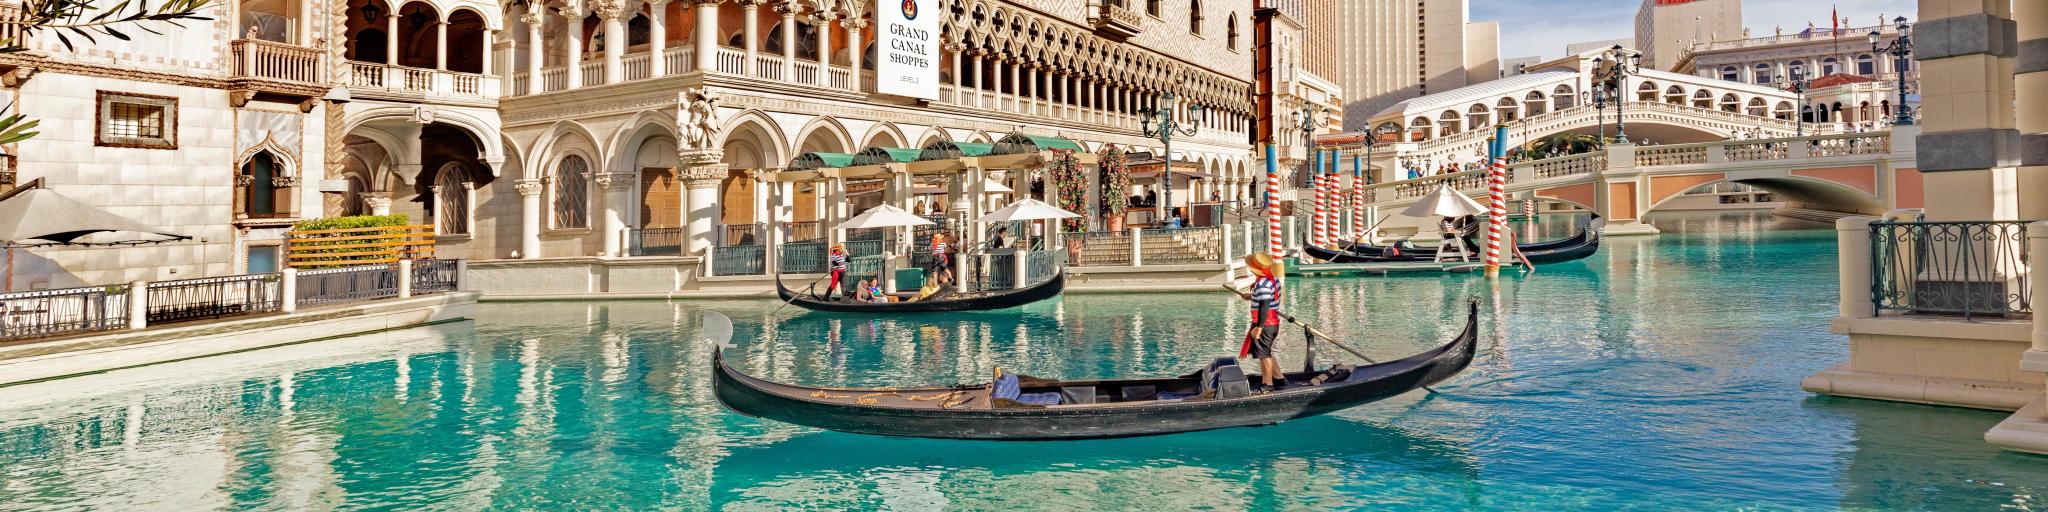 The pool of the famous Venetian Hotel with gondolas on a sunny day